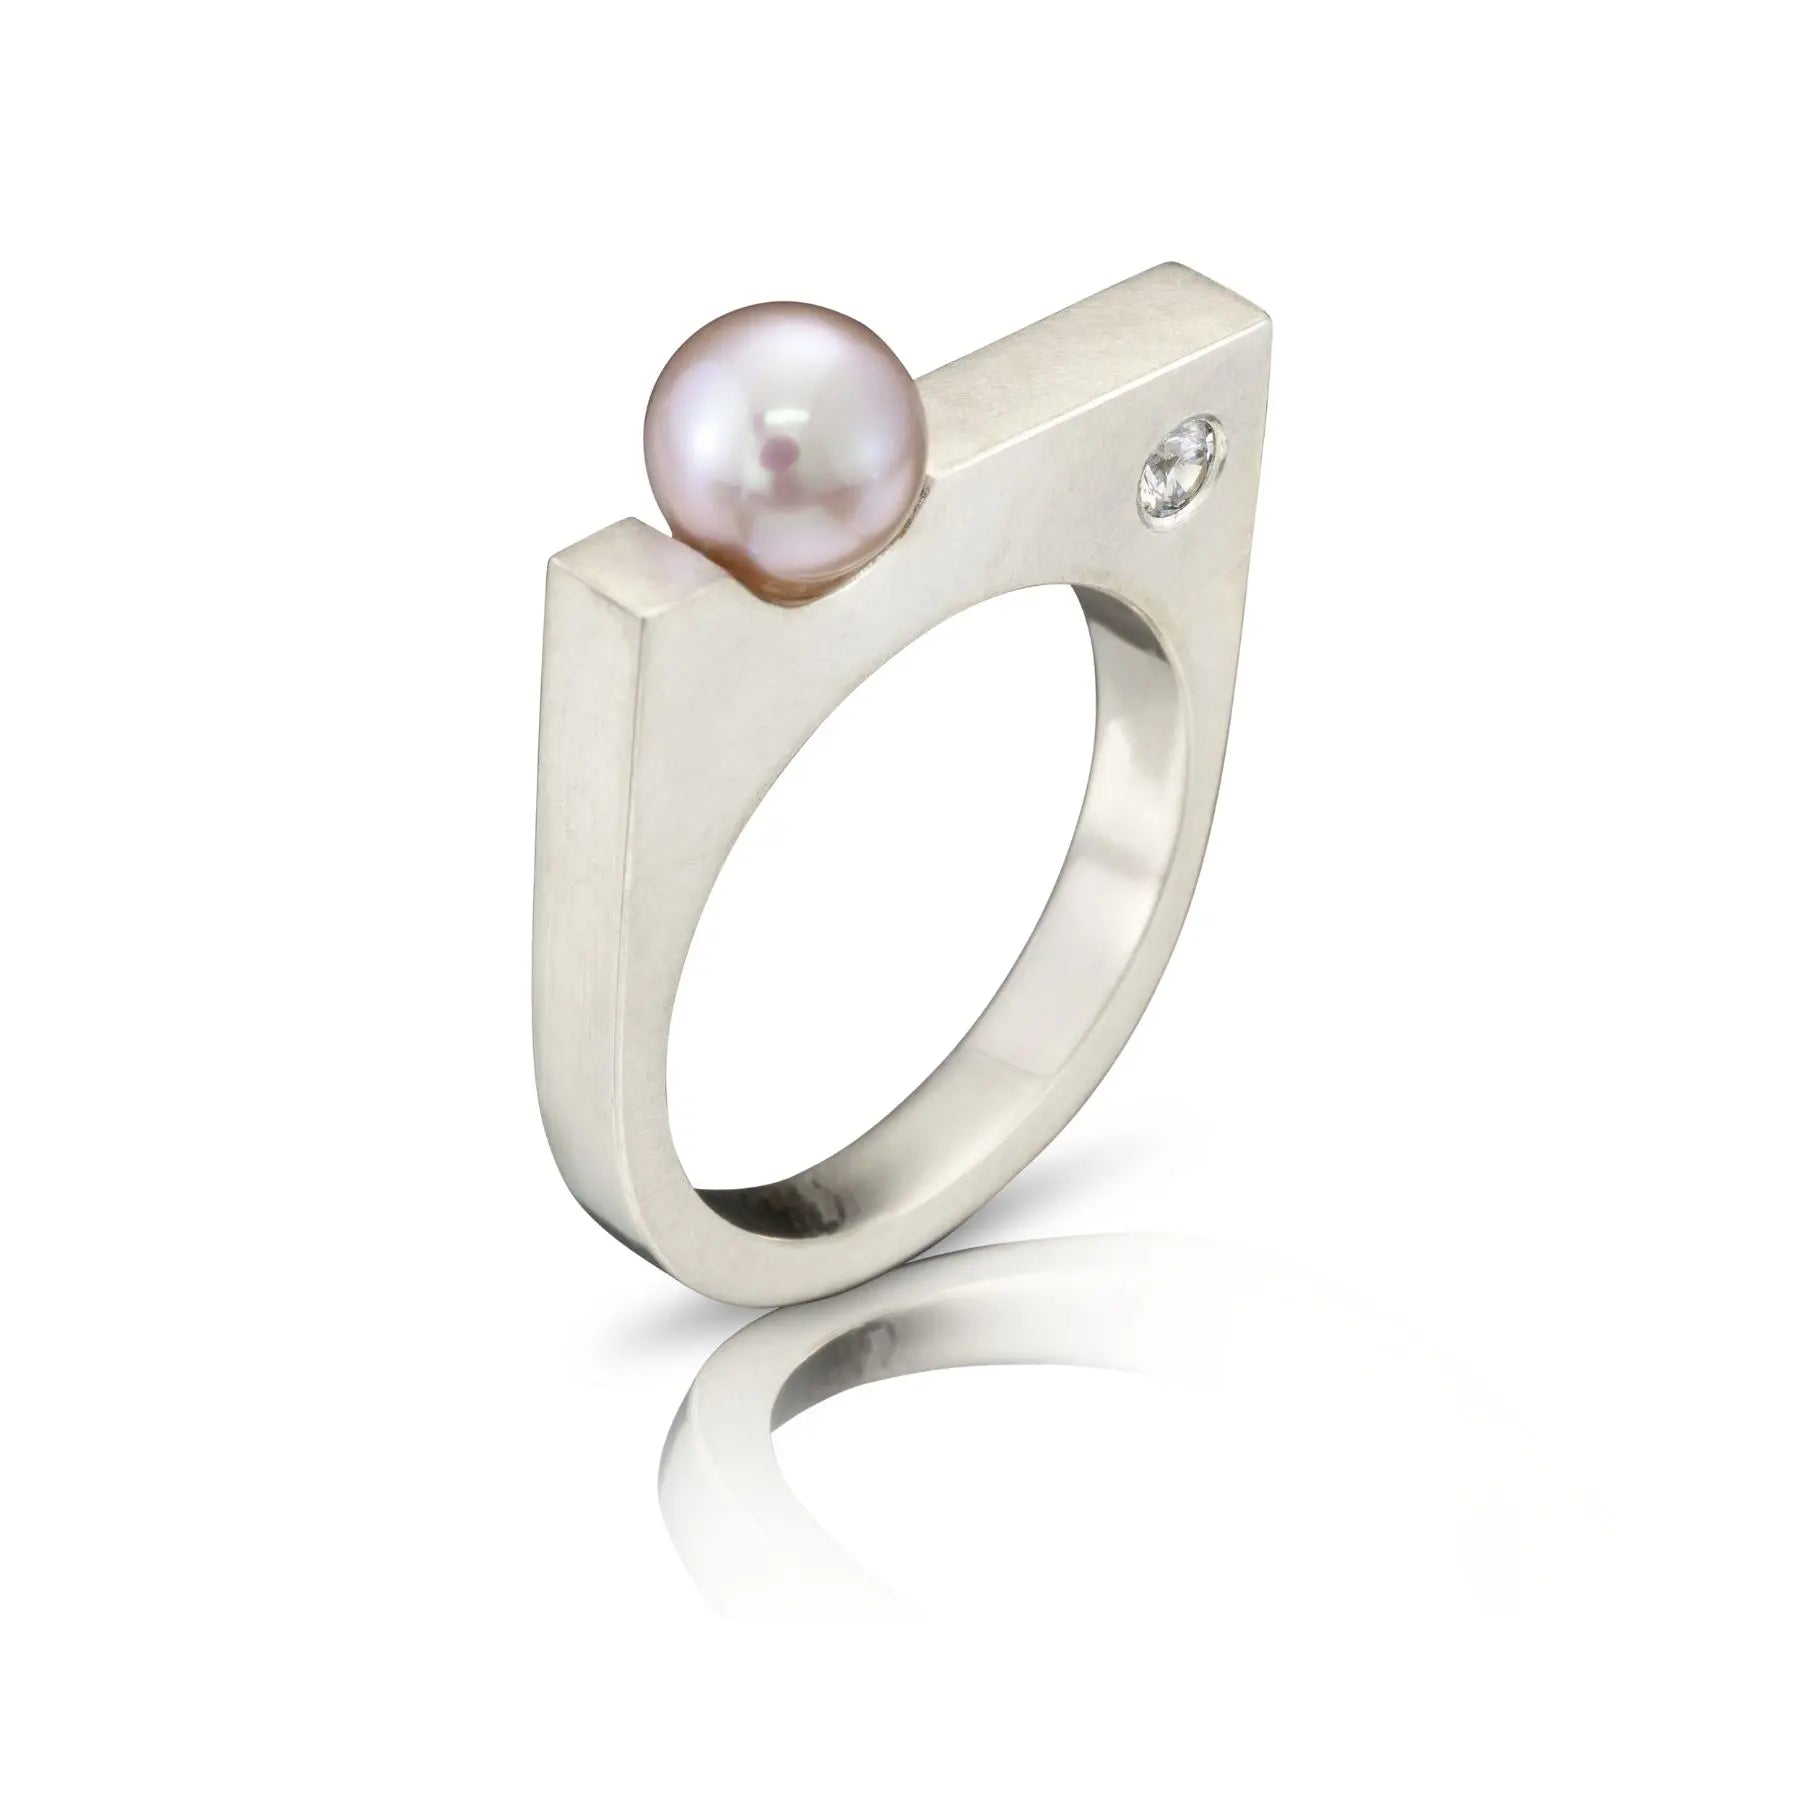 Pink Pearl Bar Ring With Diamonds. Bar Collection Pearls